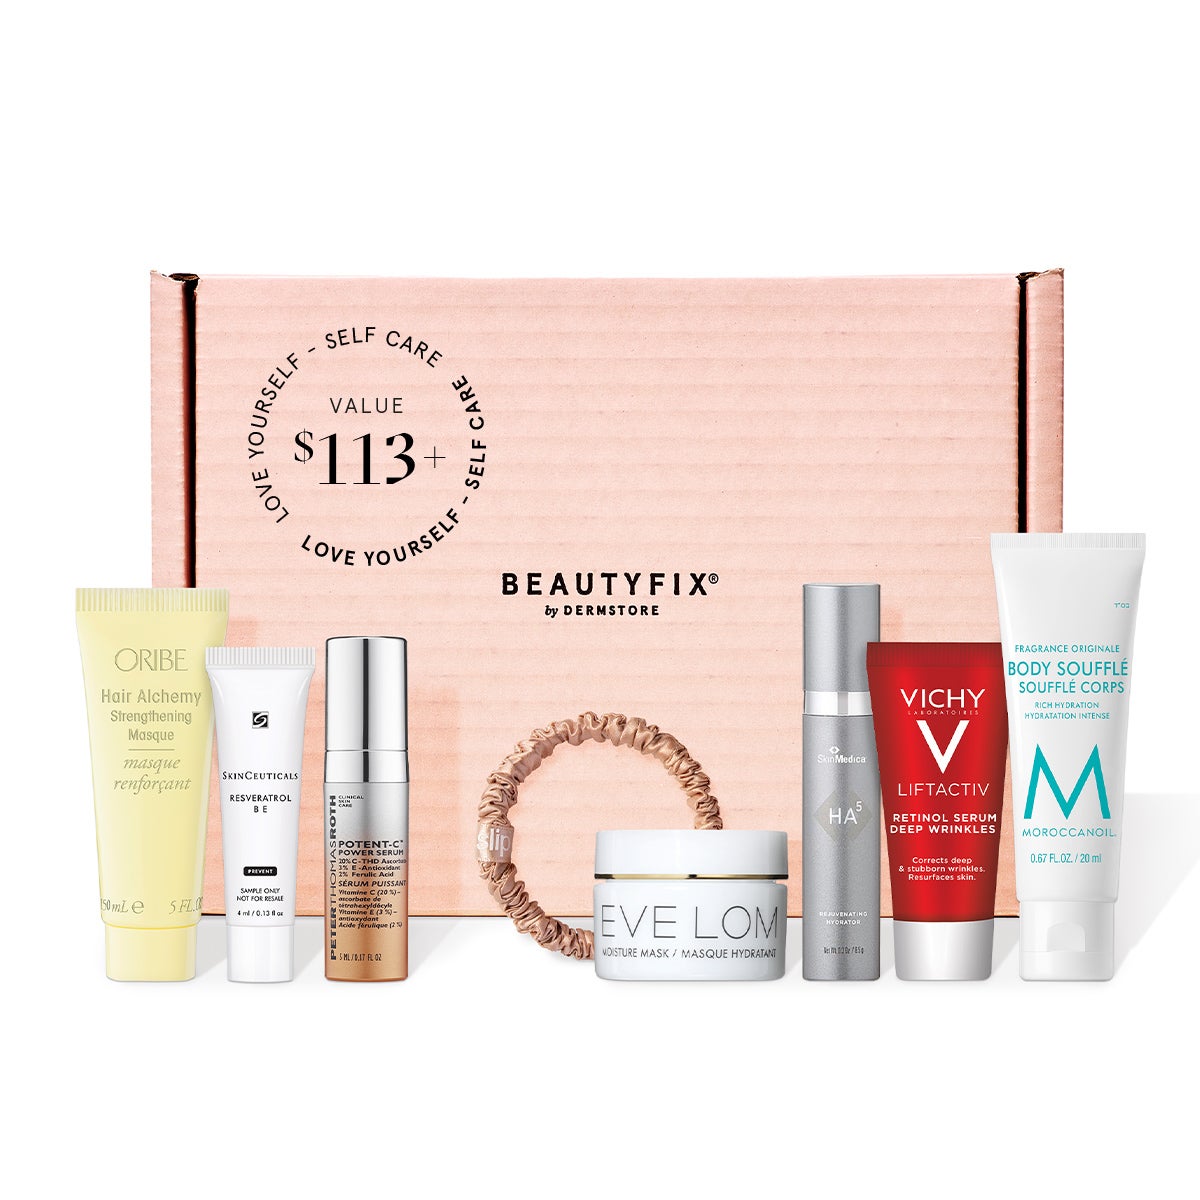 Fall in Love With BeautyFix: Show yourself some love — February’s BeautyFIX is here, with handpicked products from BRAND, BRAND & more to care, comfort & nourish.